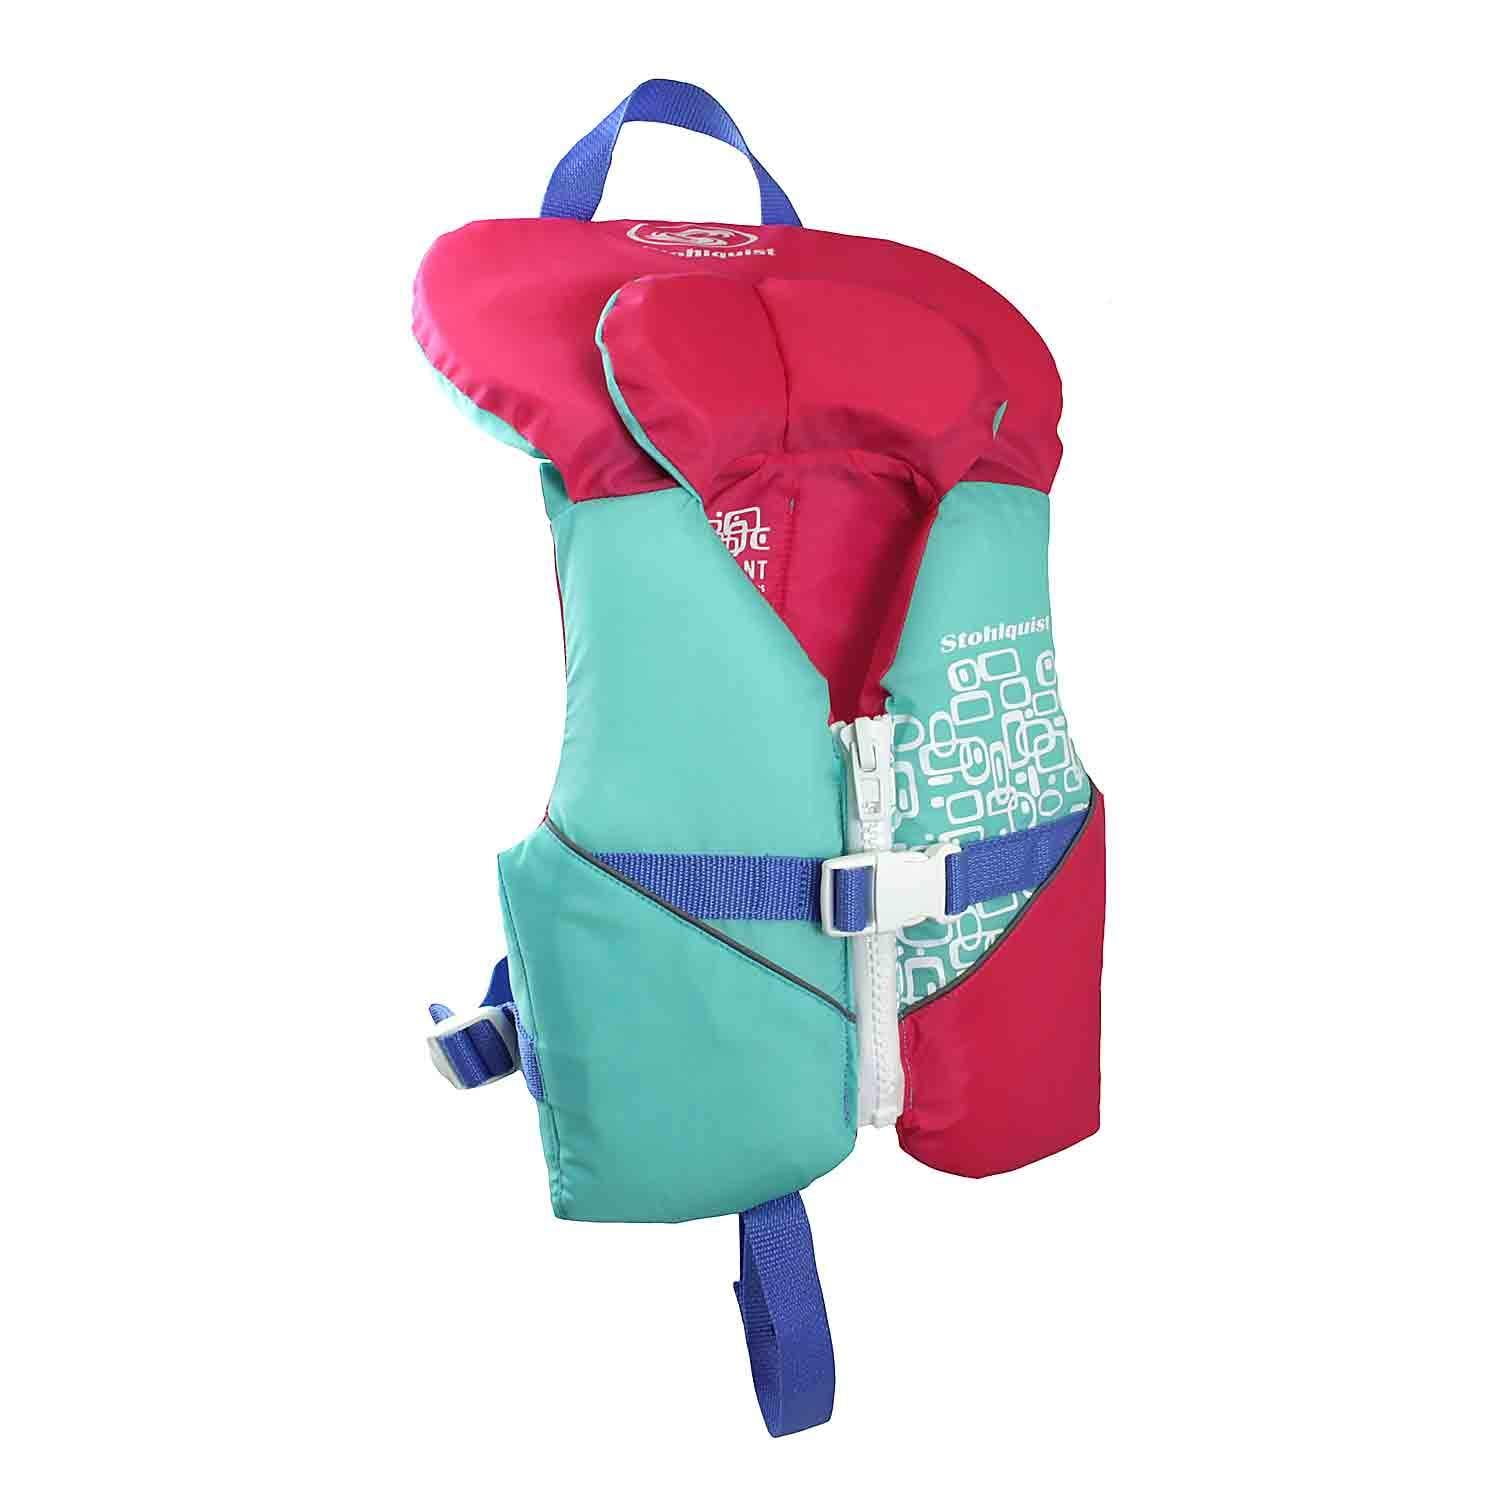 Stohlquist Kids Life Jacket Coast Guard Approved Life 30-50 lbs|Pink/Purple 